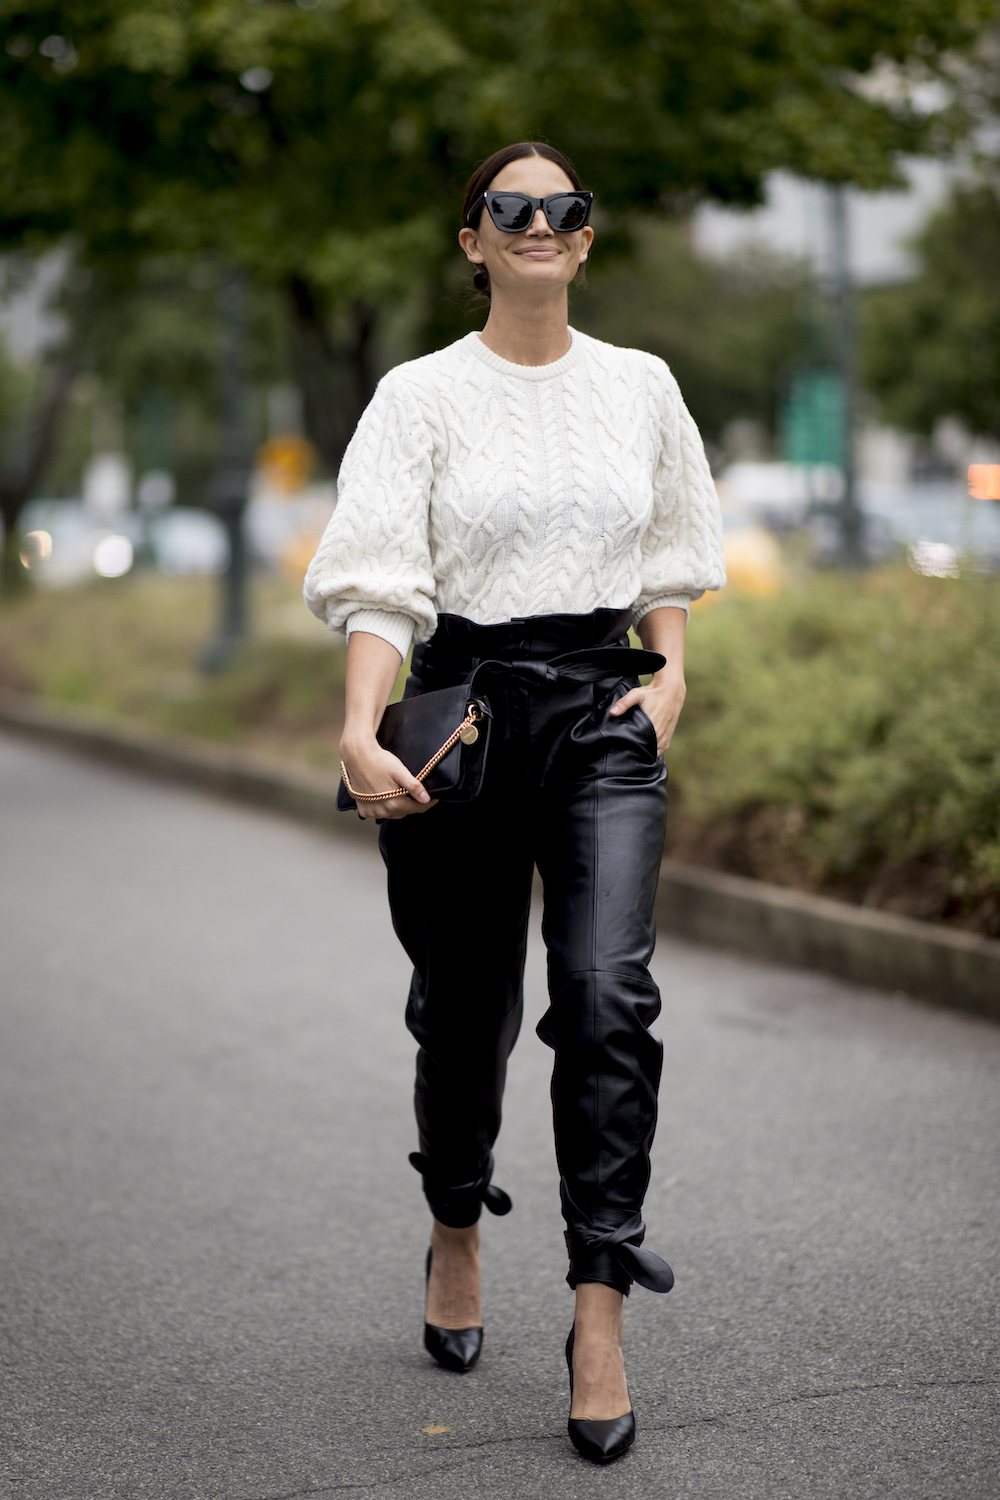 Proof Puffed Sleeves May Be the Next Trend #2